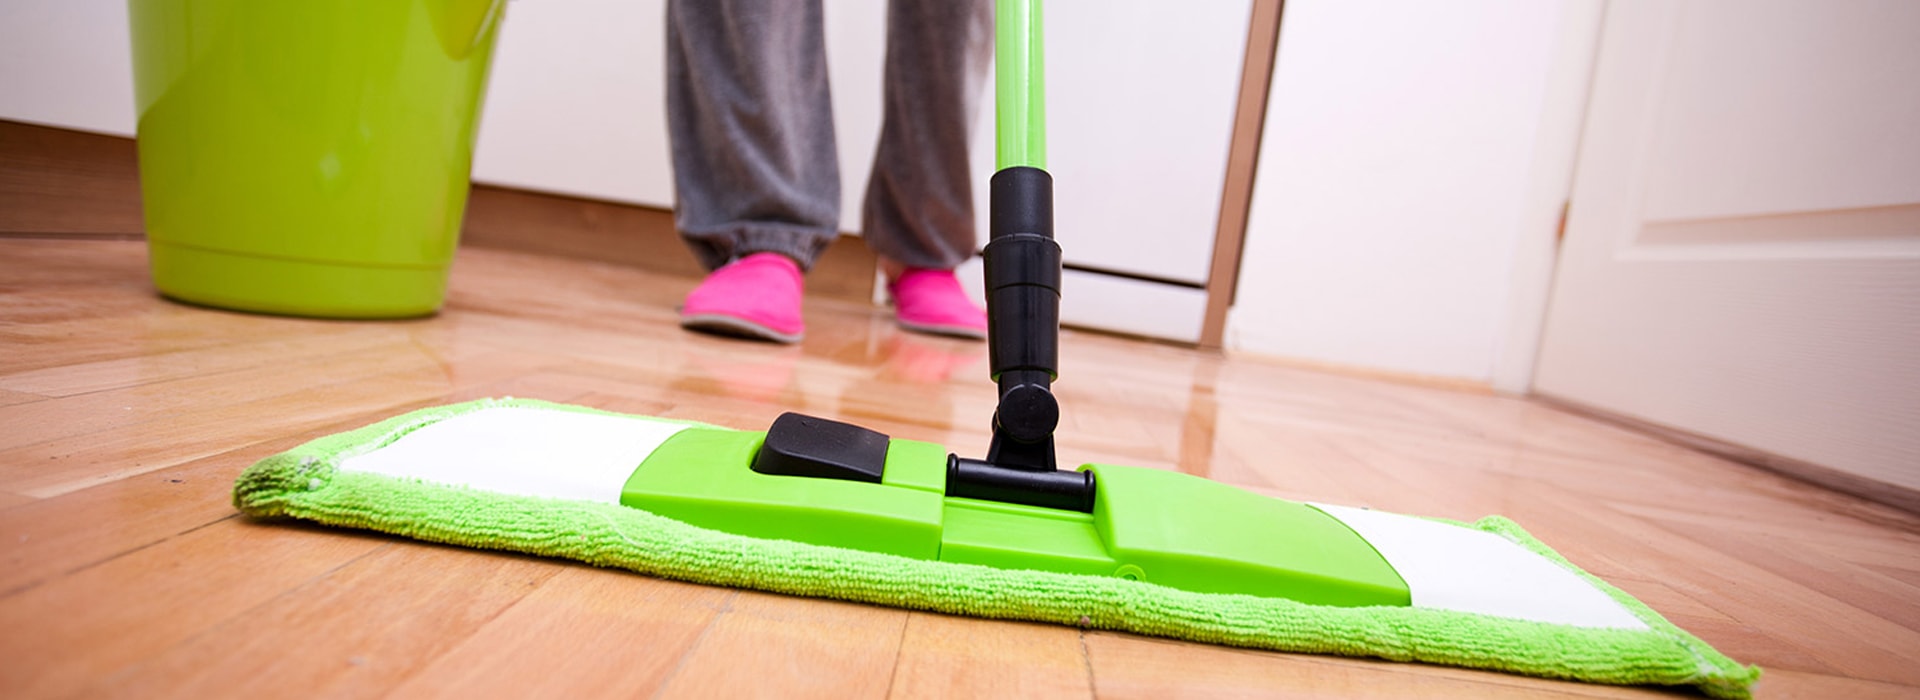 House Cleaning San Francisco, CA - [ $65 OFF ]. We are a San Francisco